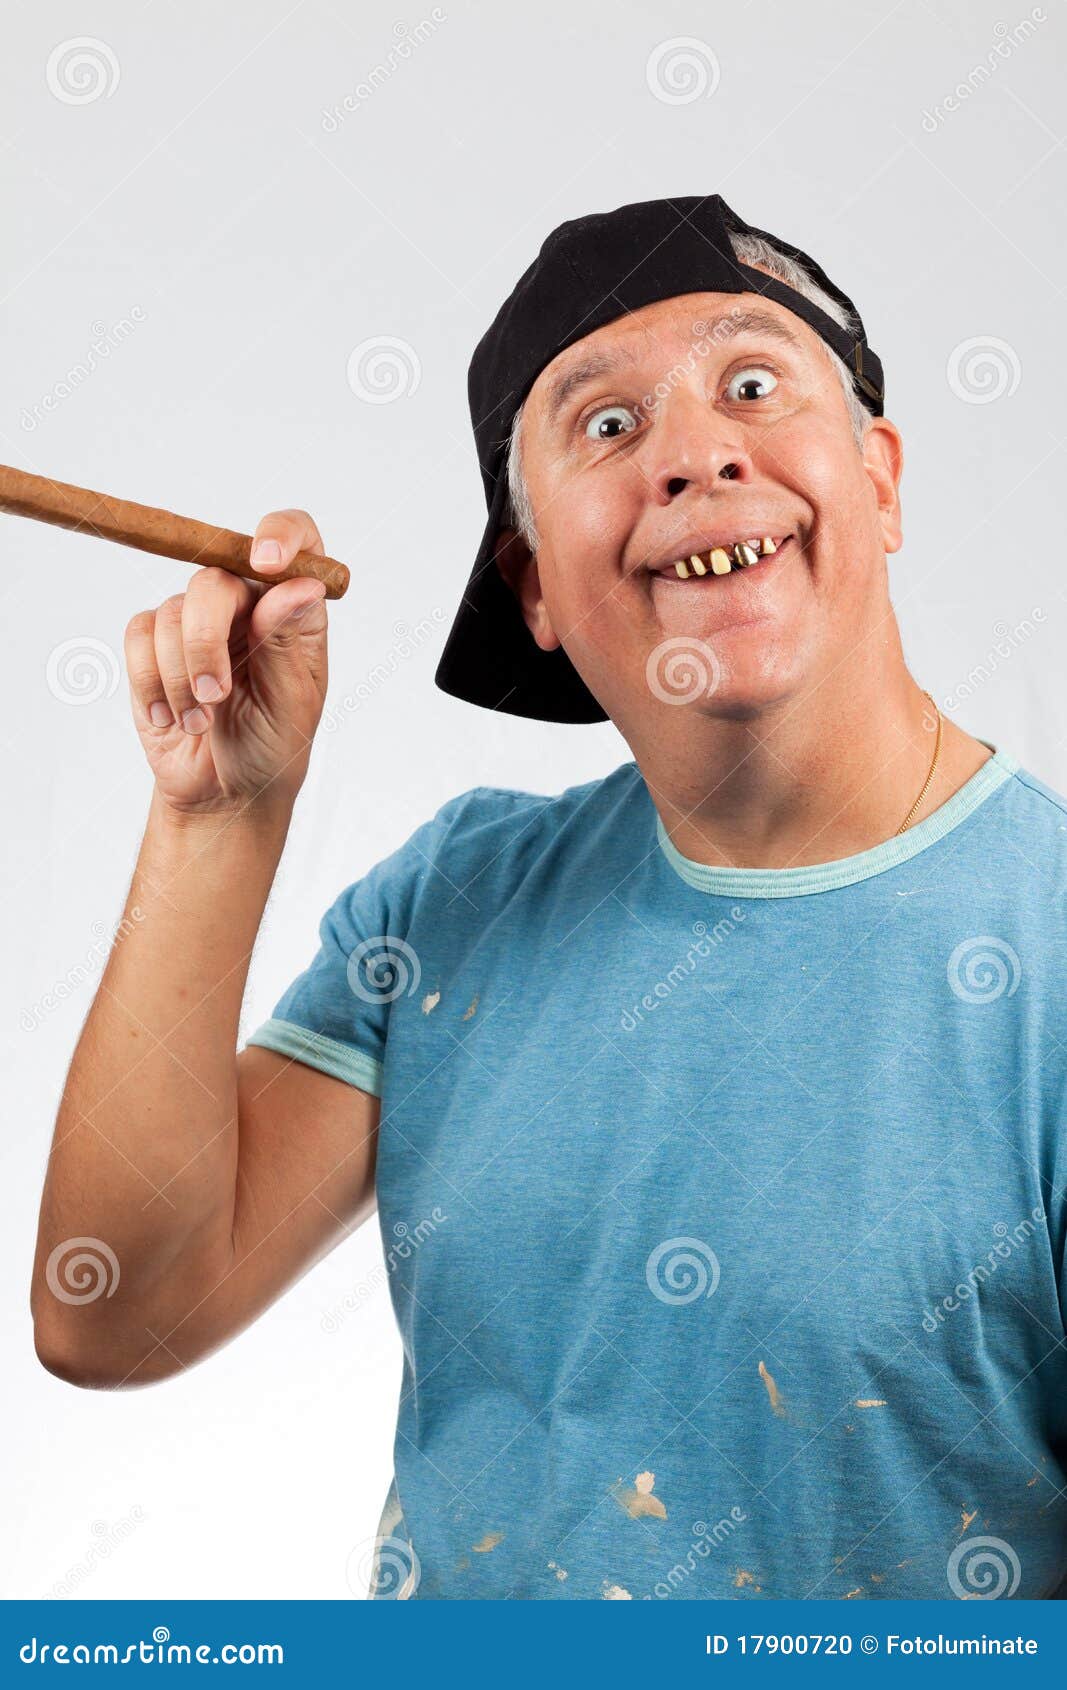 Funny Looking Man stock photo. Image of dental, laborer - 17900720